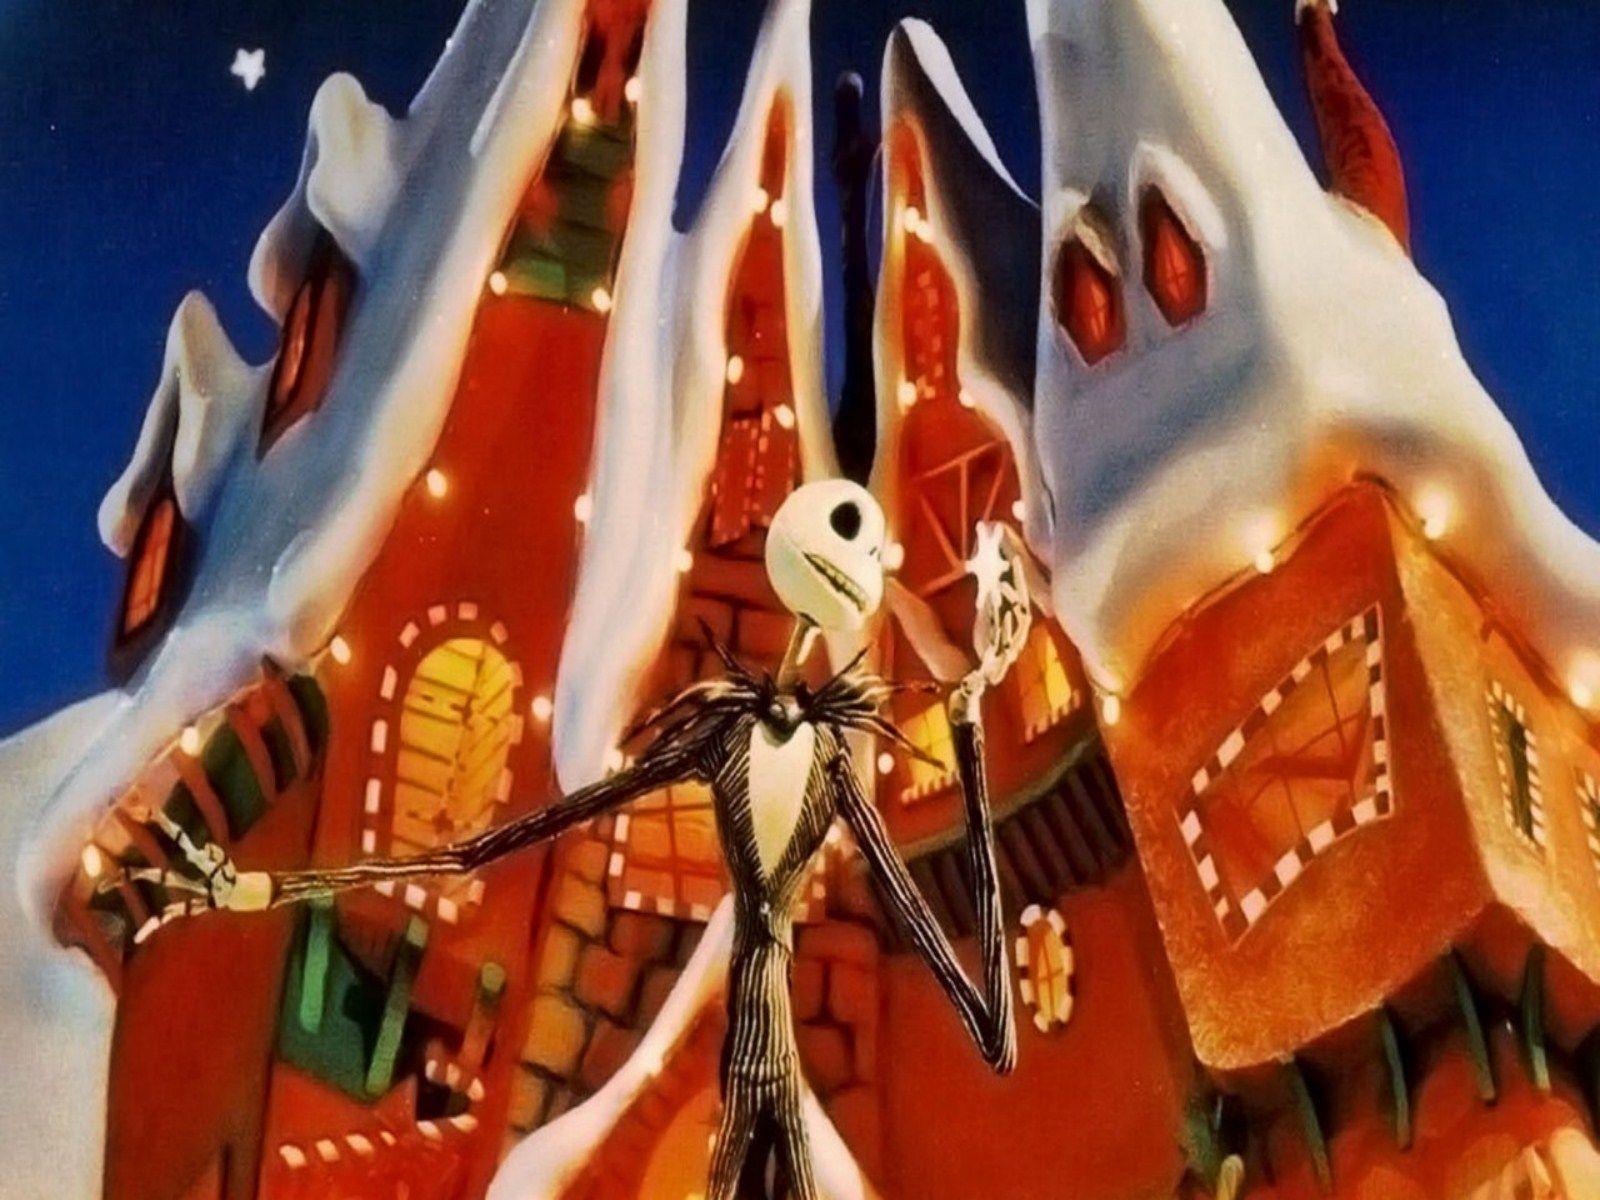 511998 1920x1080 movies the nightmare before christmas wallpaper JPG 200 kB   Rare Gallery HD Wallpapers